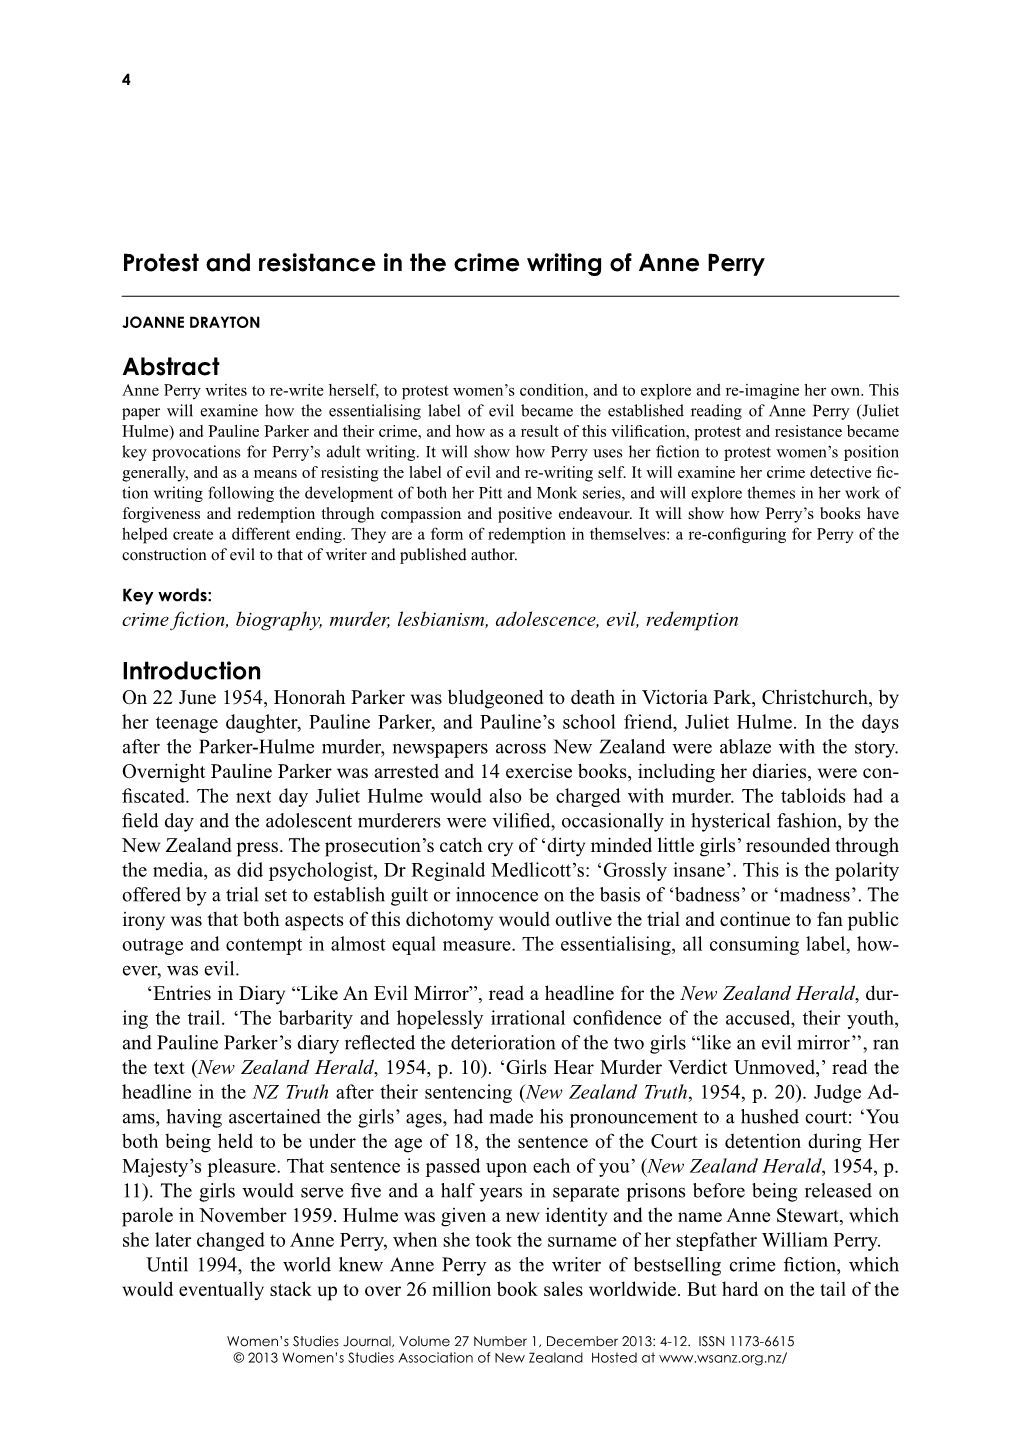 Protest and Resistance in the Crime Writing of Anne Perry Abstract